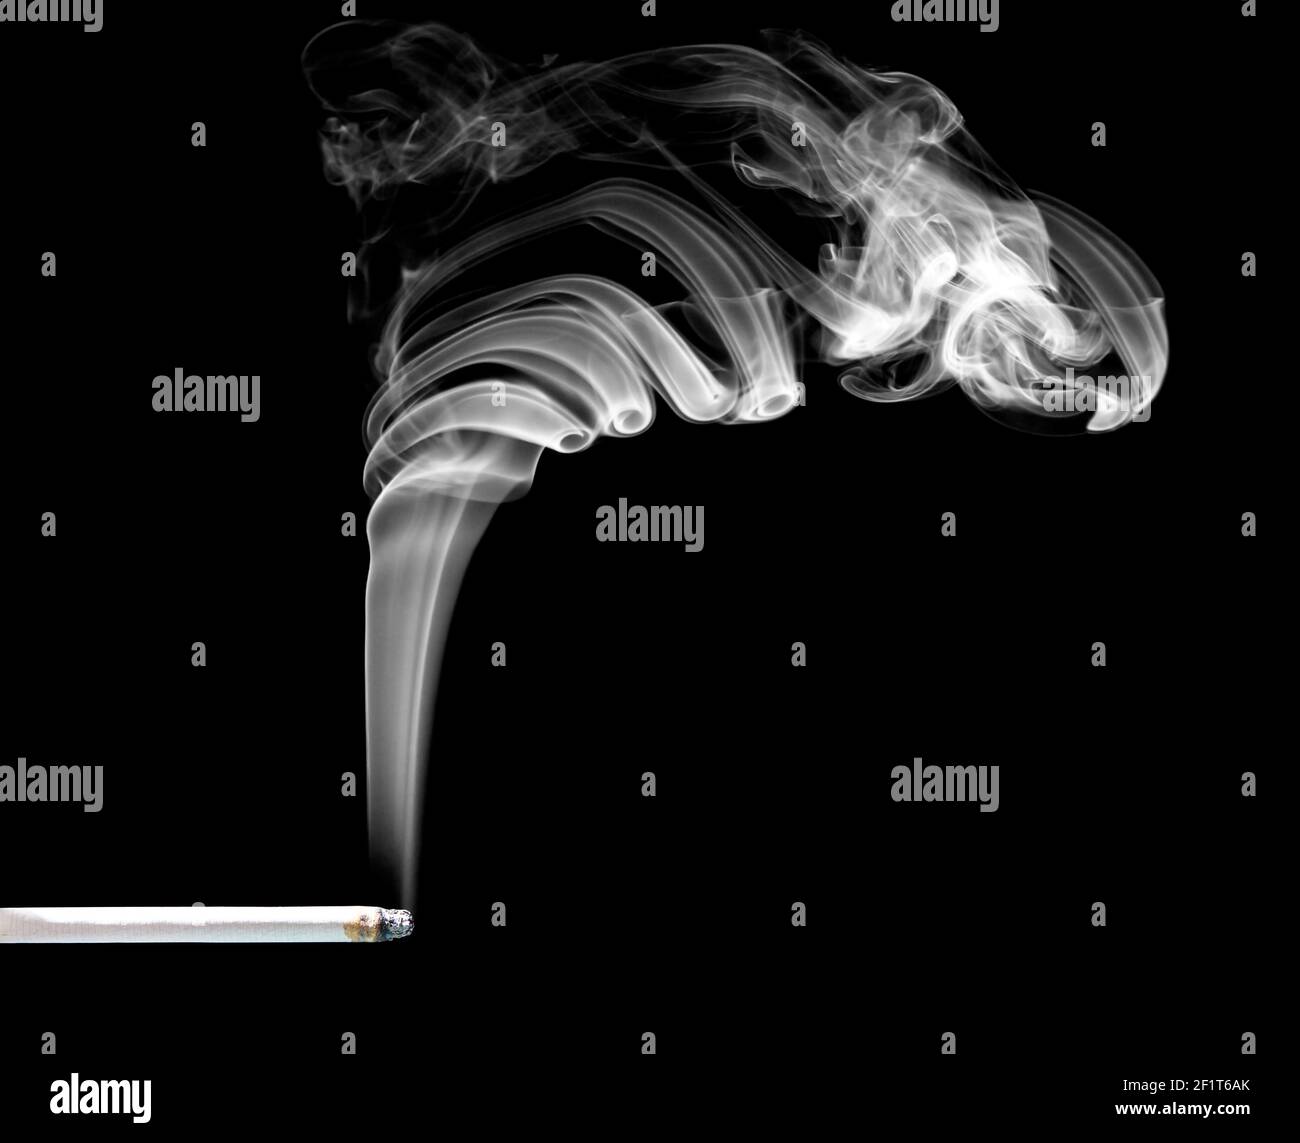 Close-up of a white smoke cloud coming from a lit slim cigarette against black background. Stock Photo